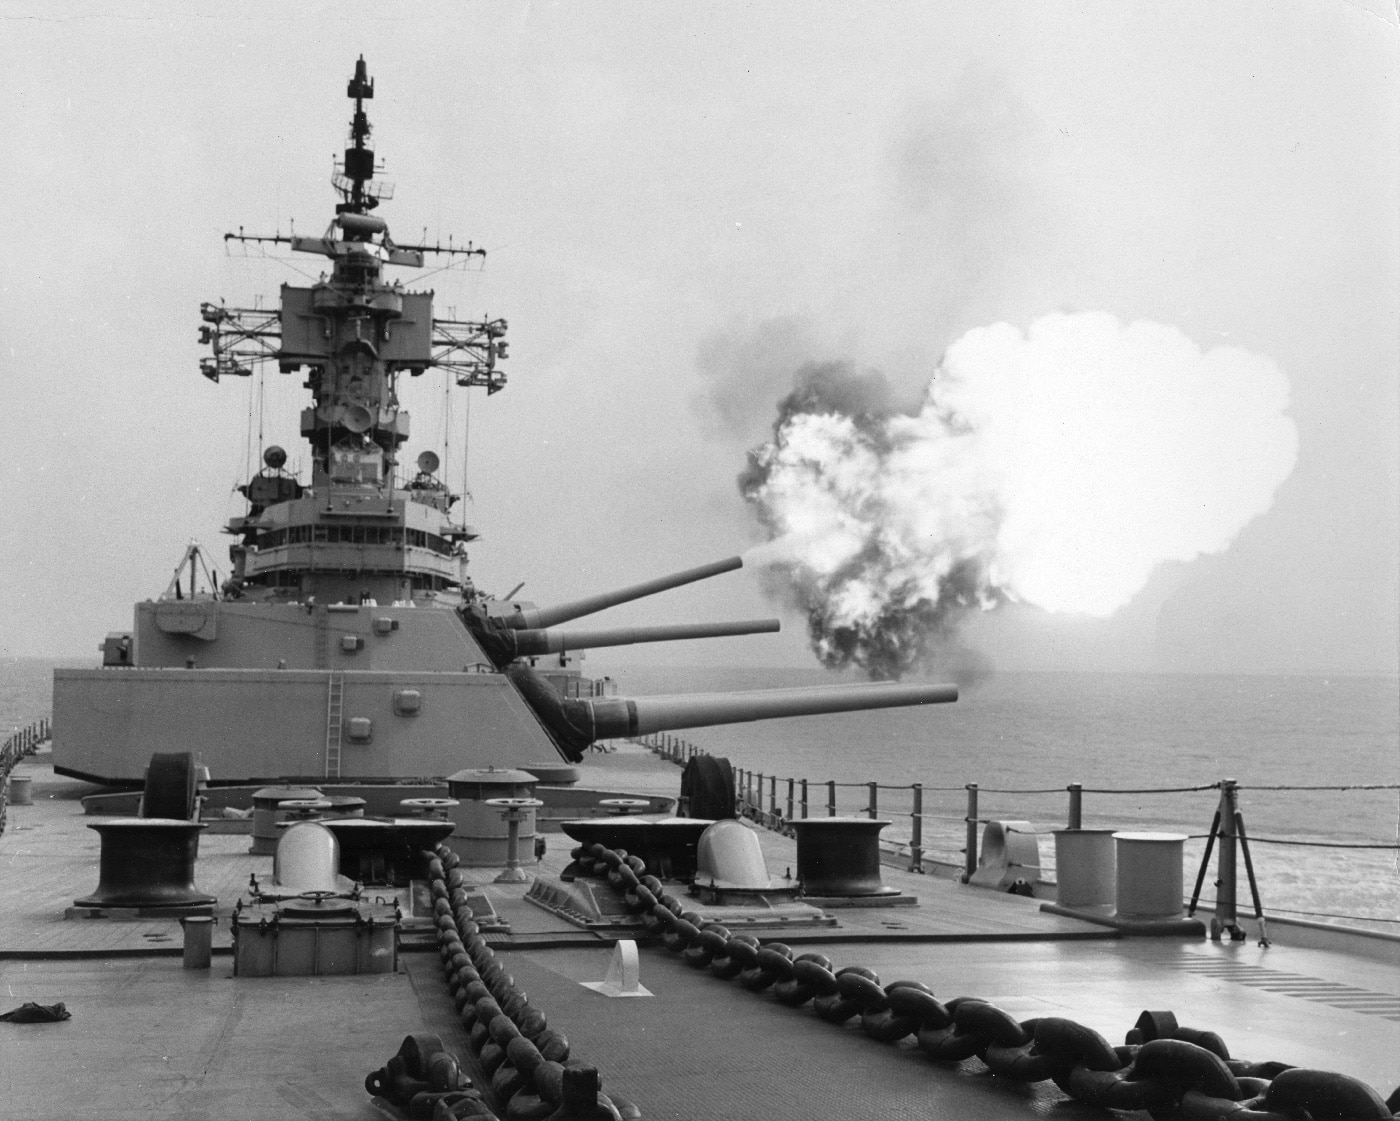 USS New Jersry fires a single 16-inch gun from Turret No.2 in Vietnam